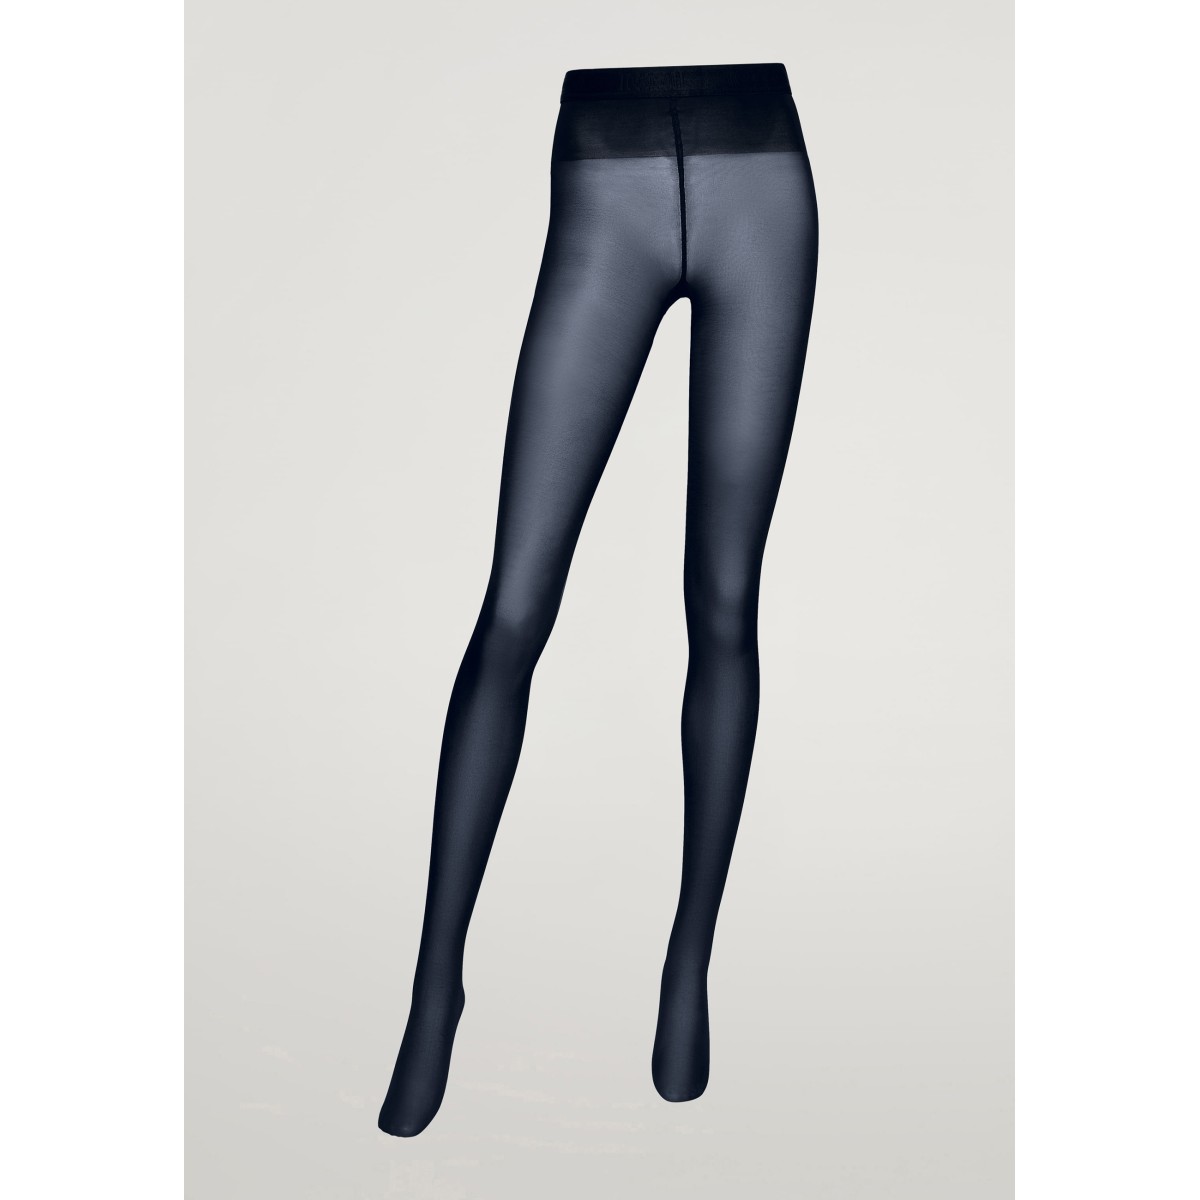 Buy Wolford Synergy 20 Push-Up Tights 14530 at Ubuy Ghana